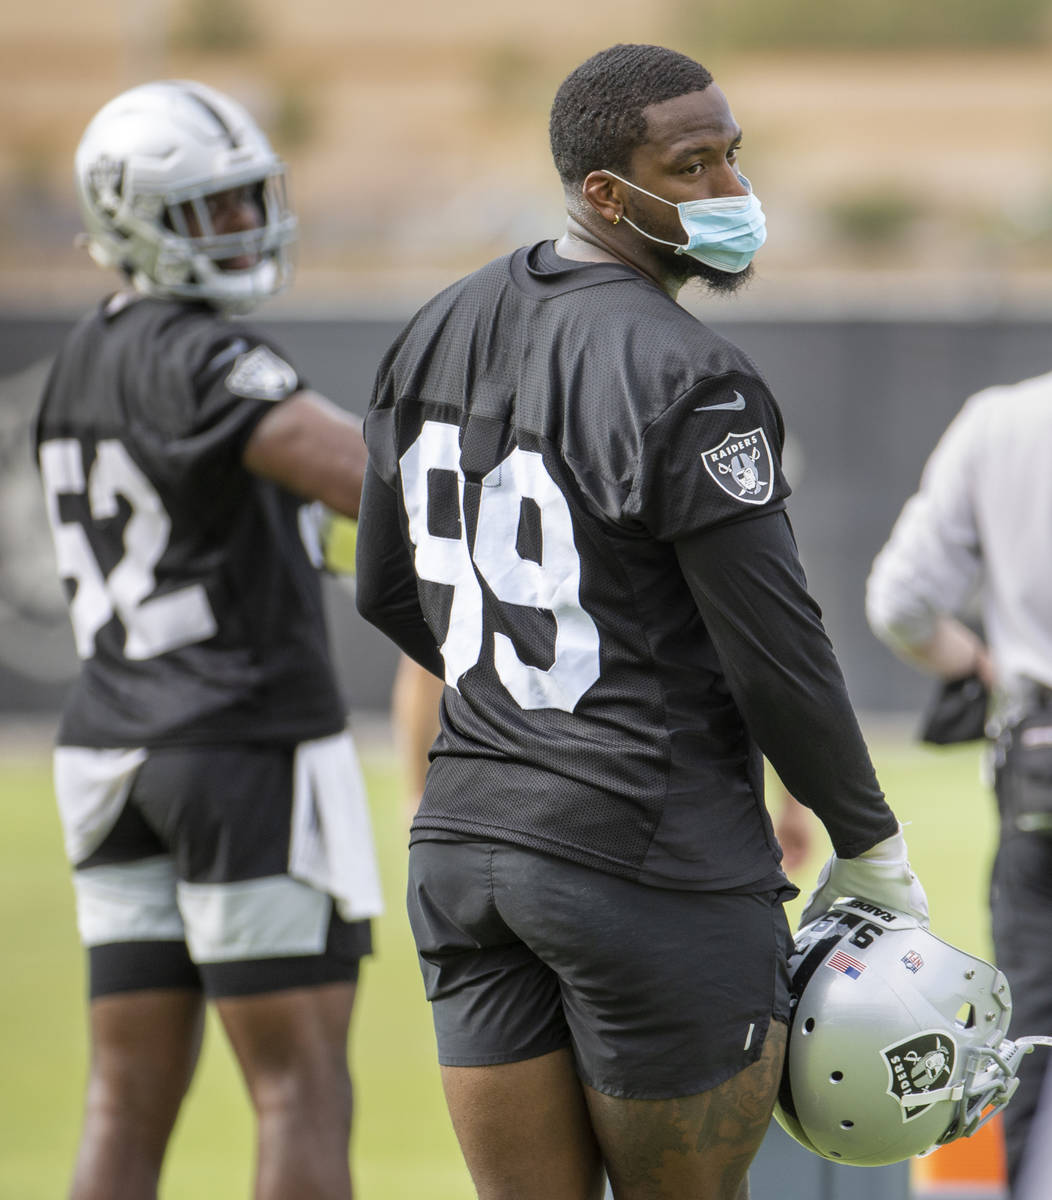 Raiders defensive end Clelin Ferrell (99) is one of a handful of players masking up during trai ...